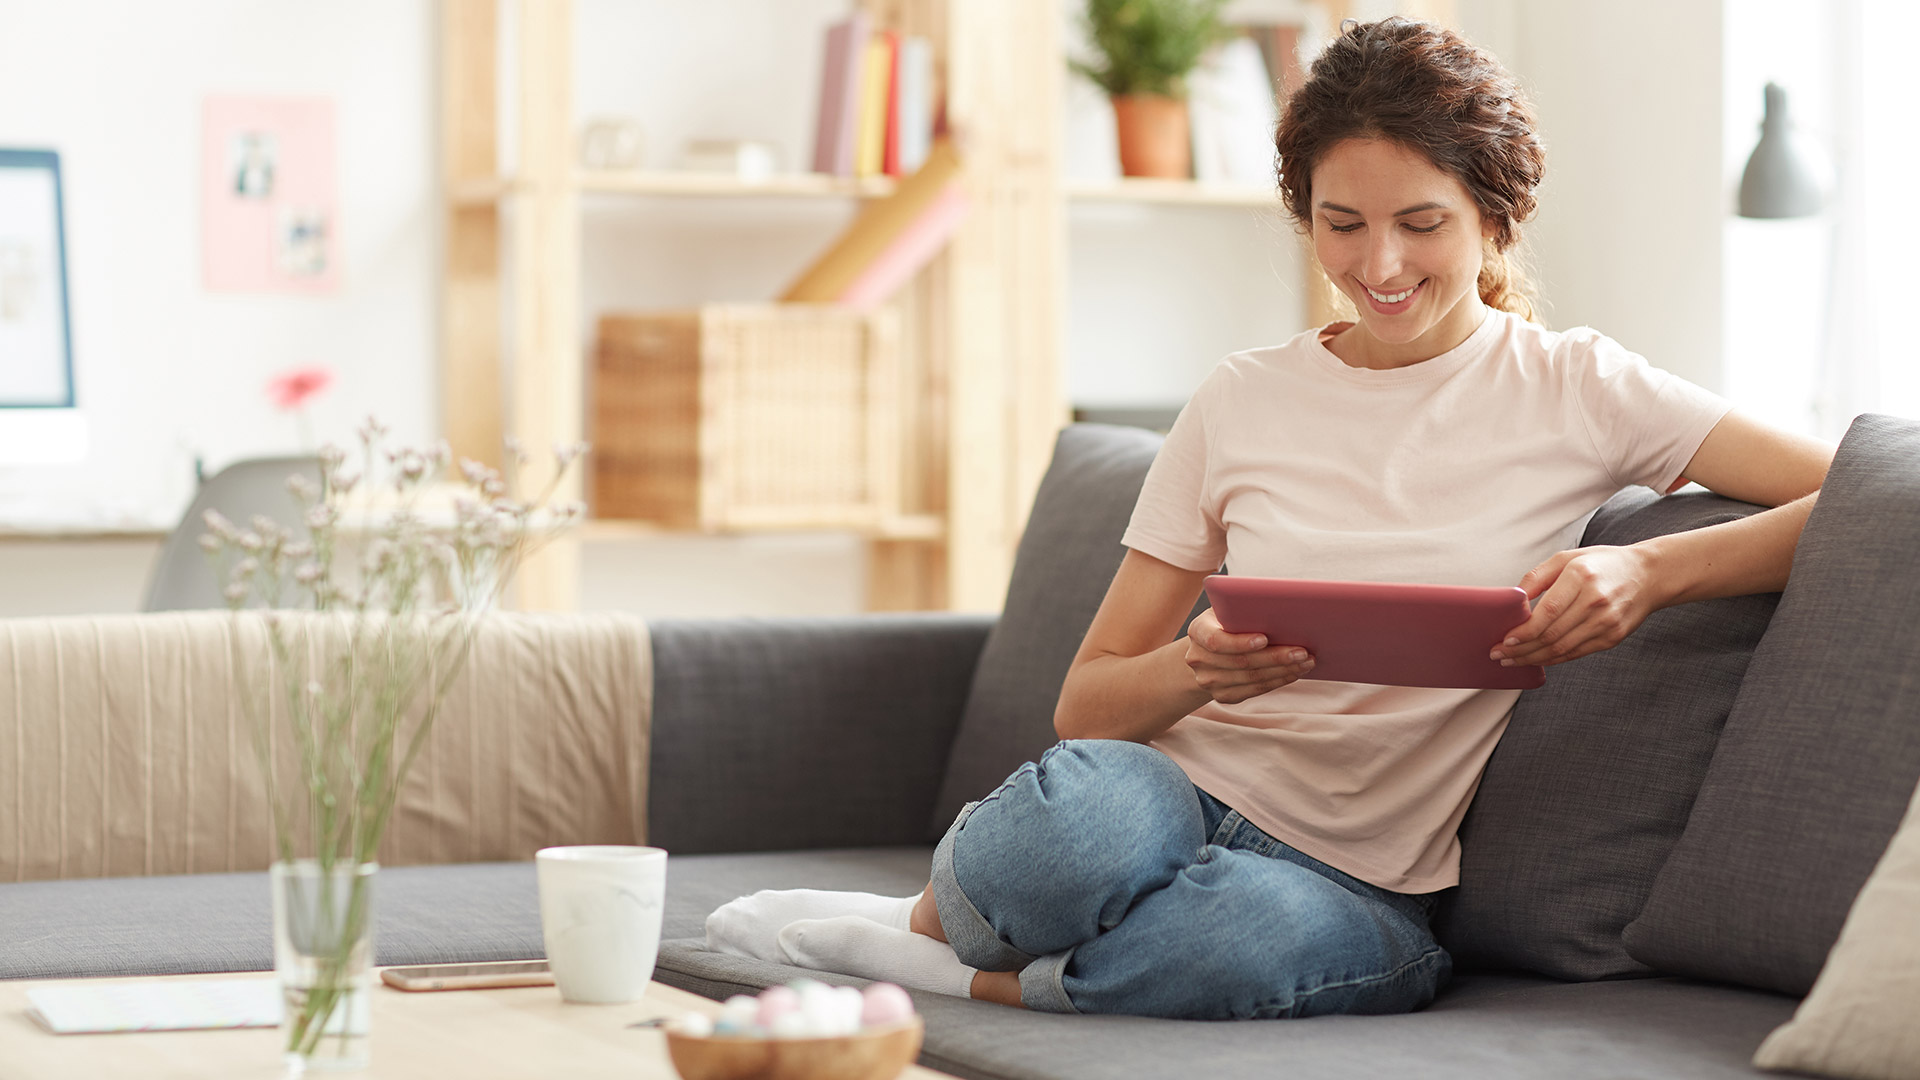 Woman using tablet at home on the couch